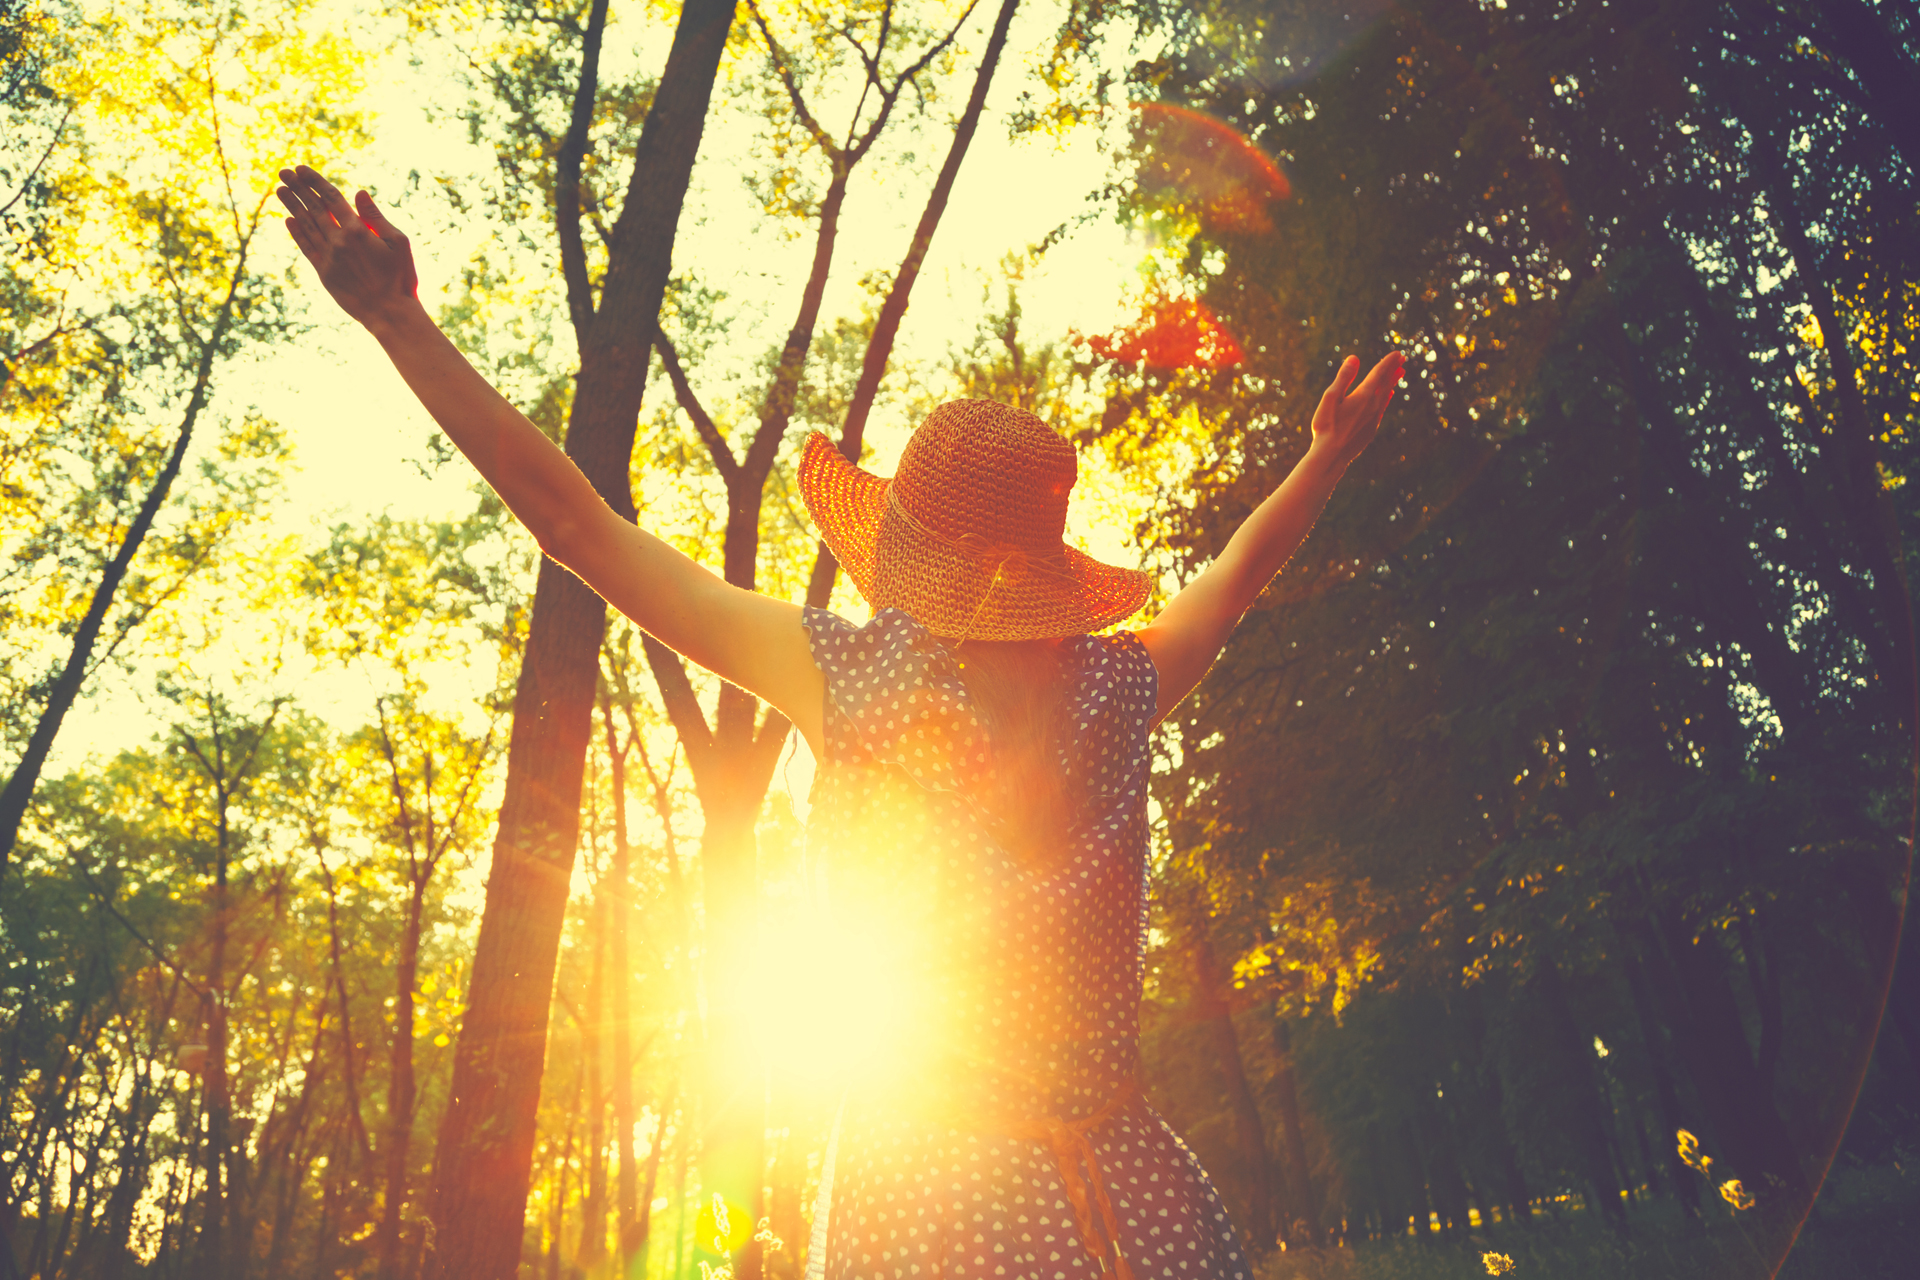 Woman Standing Free in Woods with Sunlight